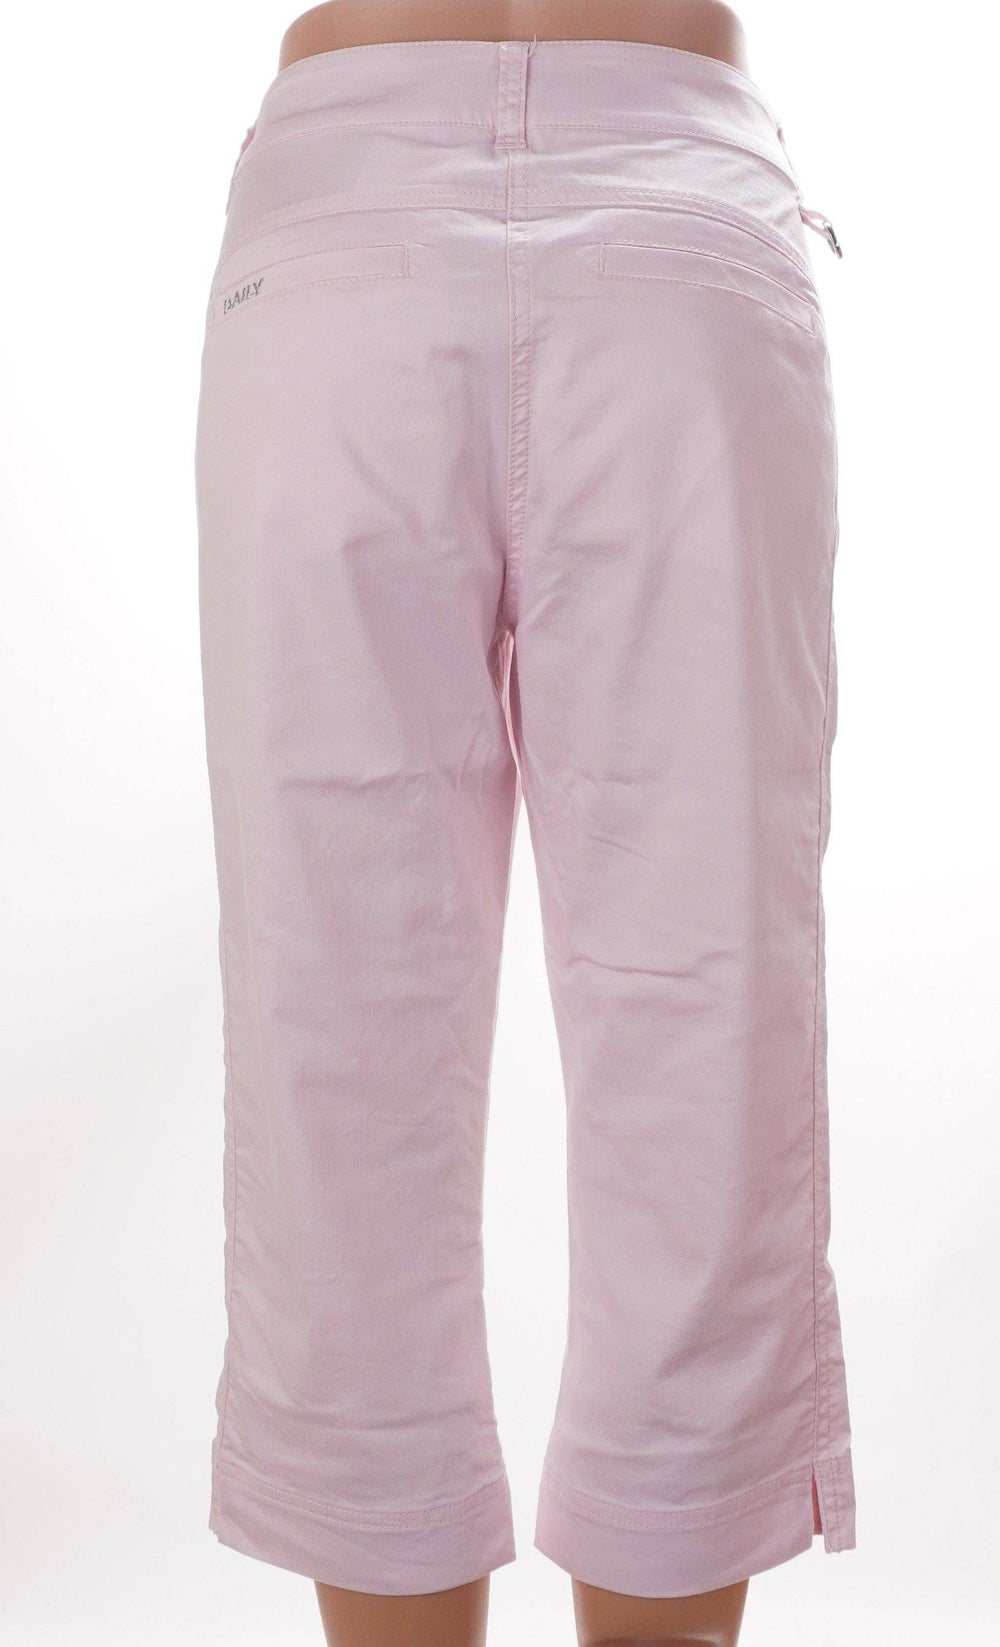 Daily Sports Light Pink / 14 / Consigned Daily Sports Pant - Light Pink - Size 14